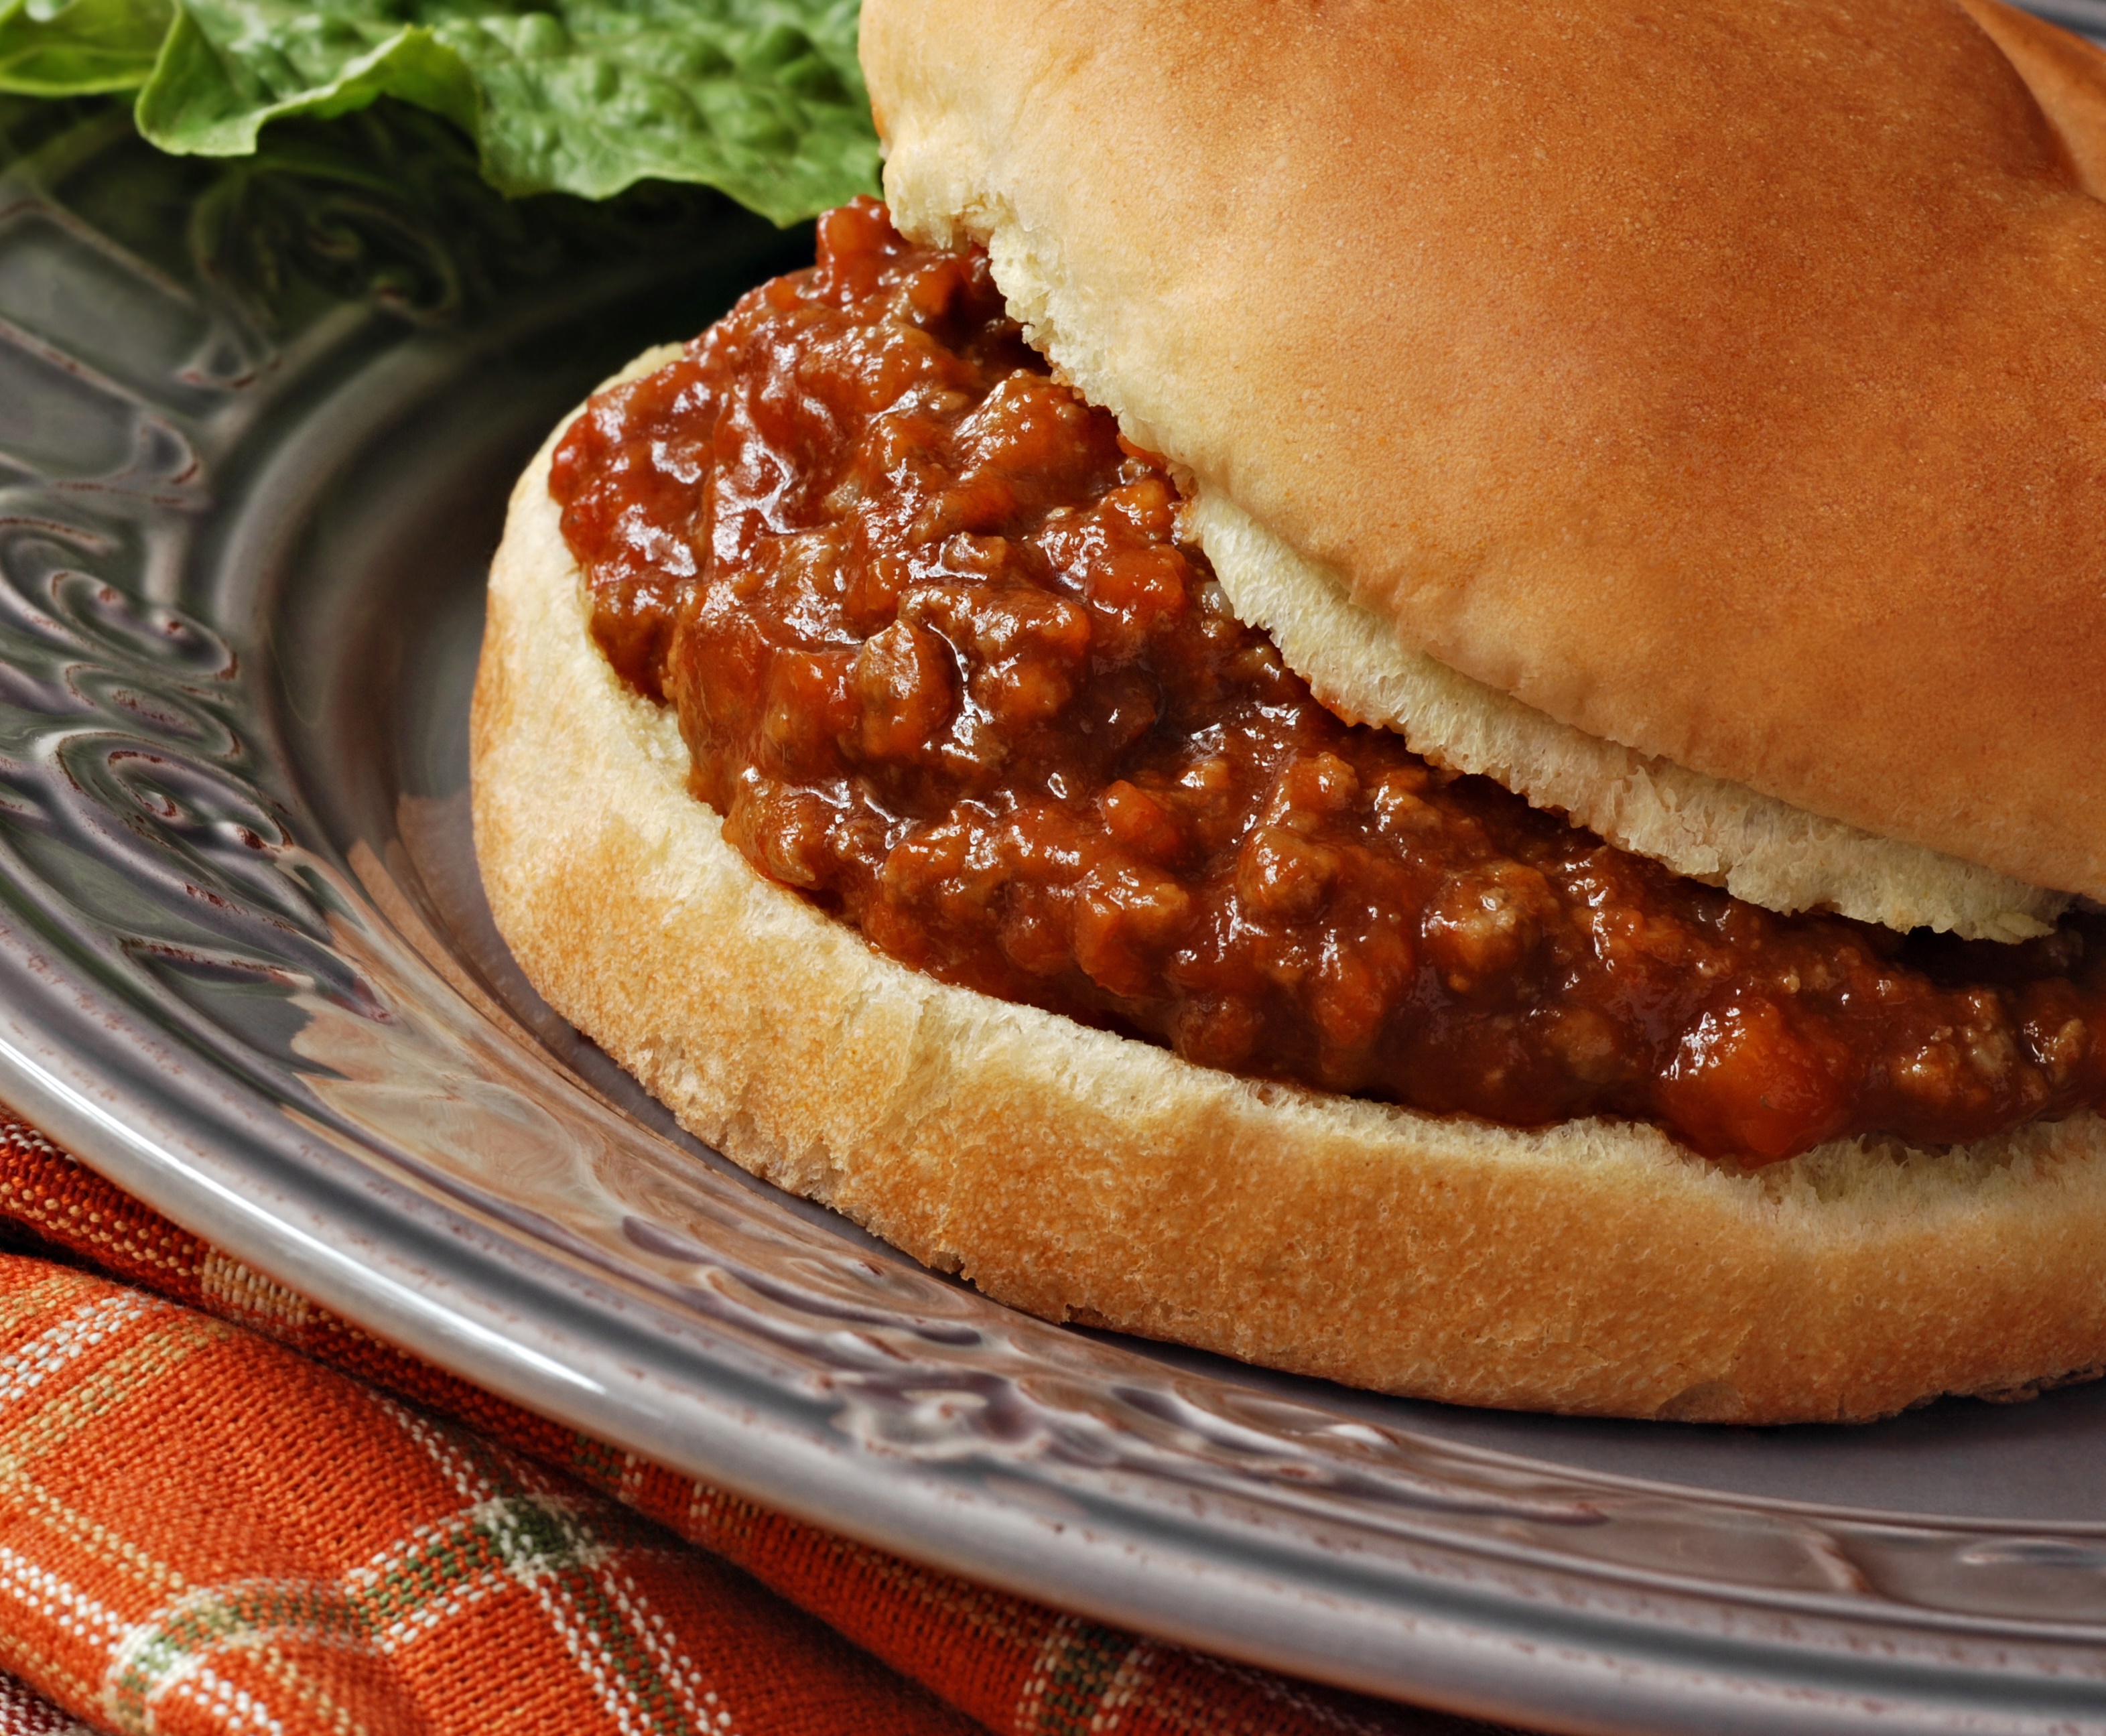 old fashioned sloppy joes recipe with tomato soup